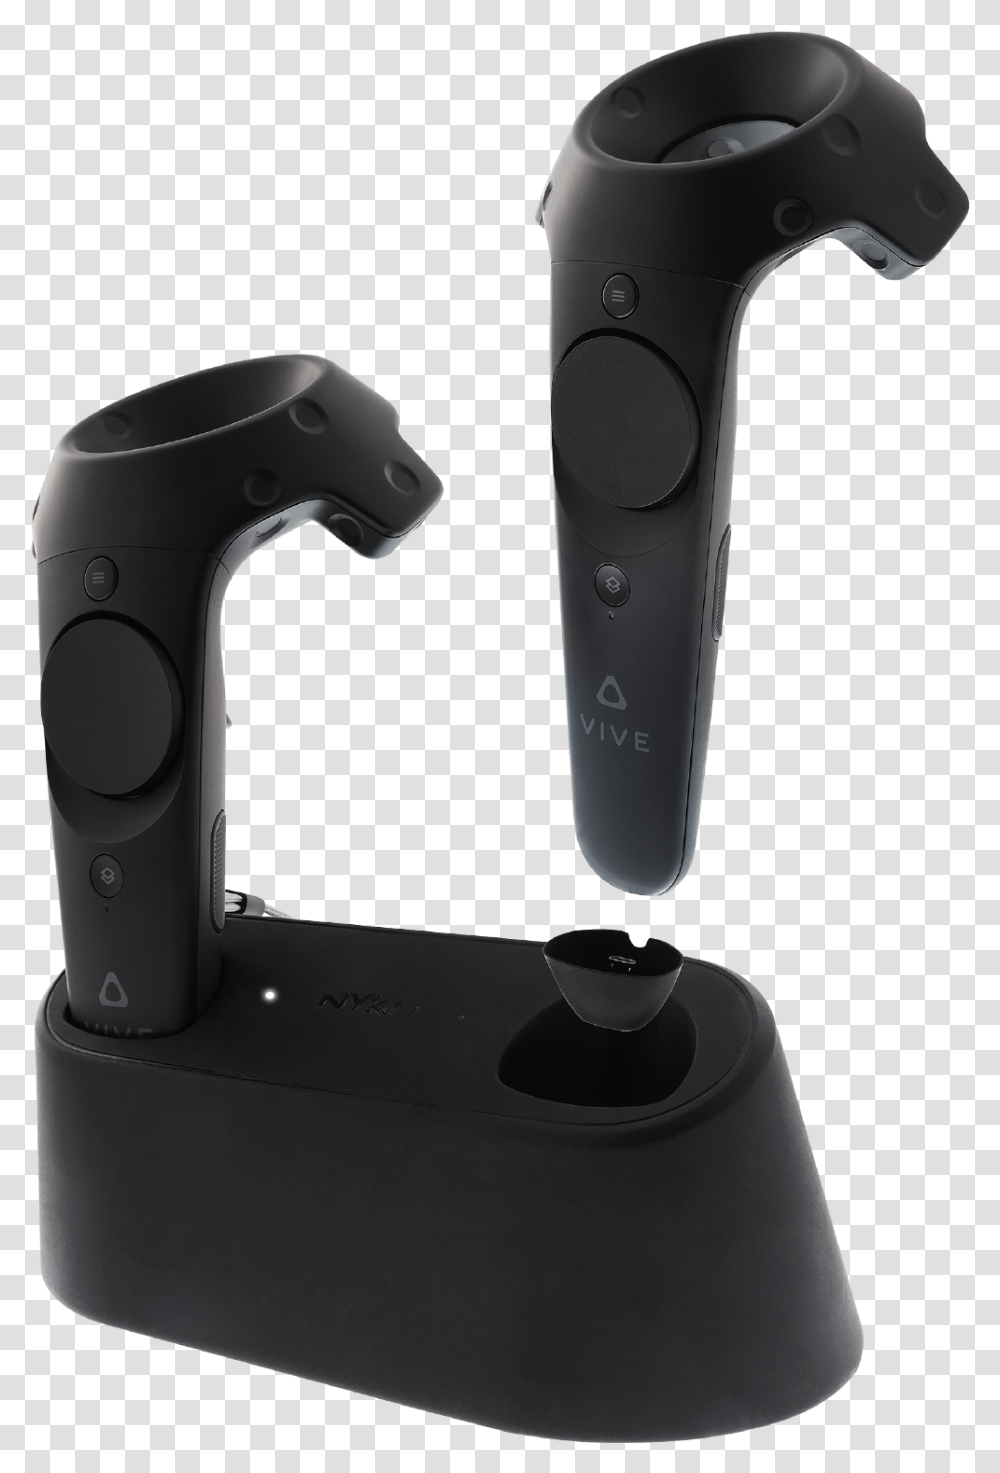 Htc Vive Charge Base Playstation Vr Accessories, Electronics, Sink Faucet, Appliance, Camera Transparent Png